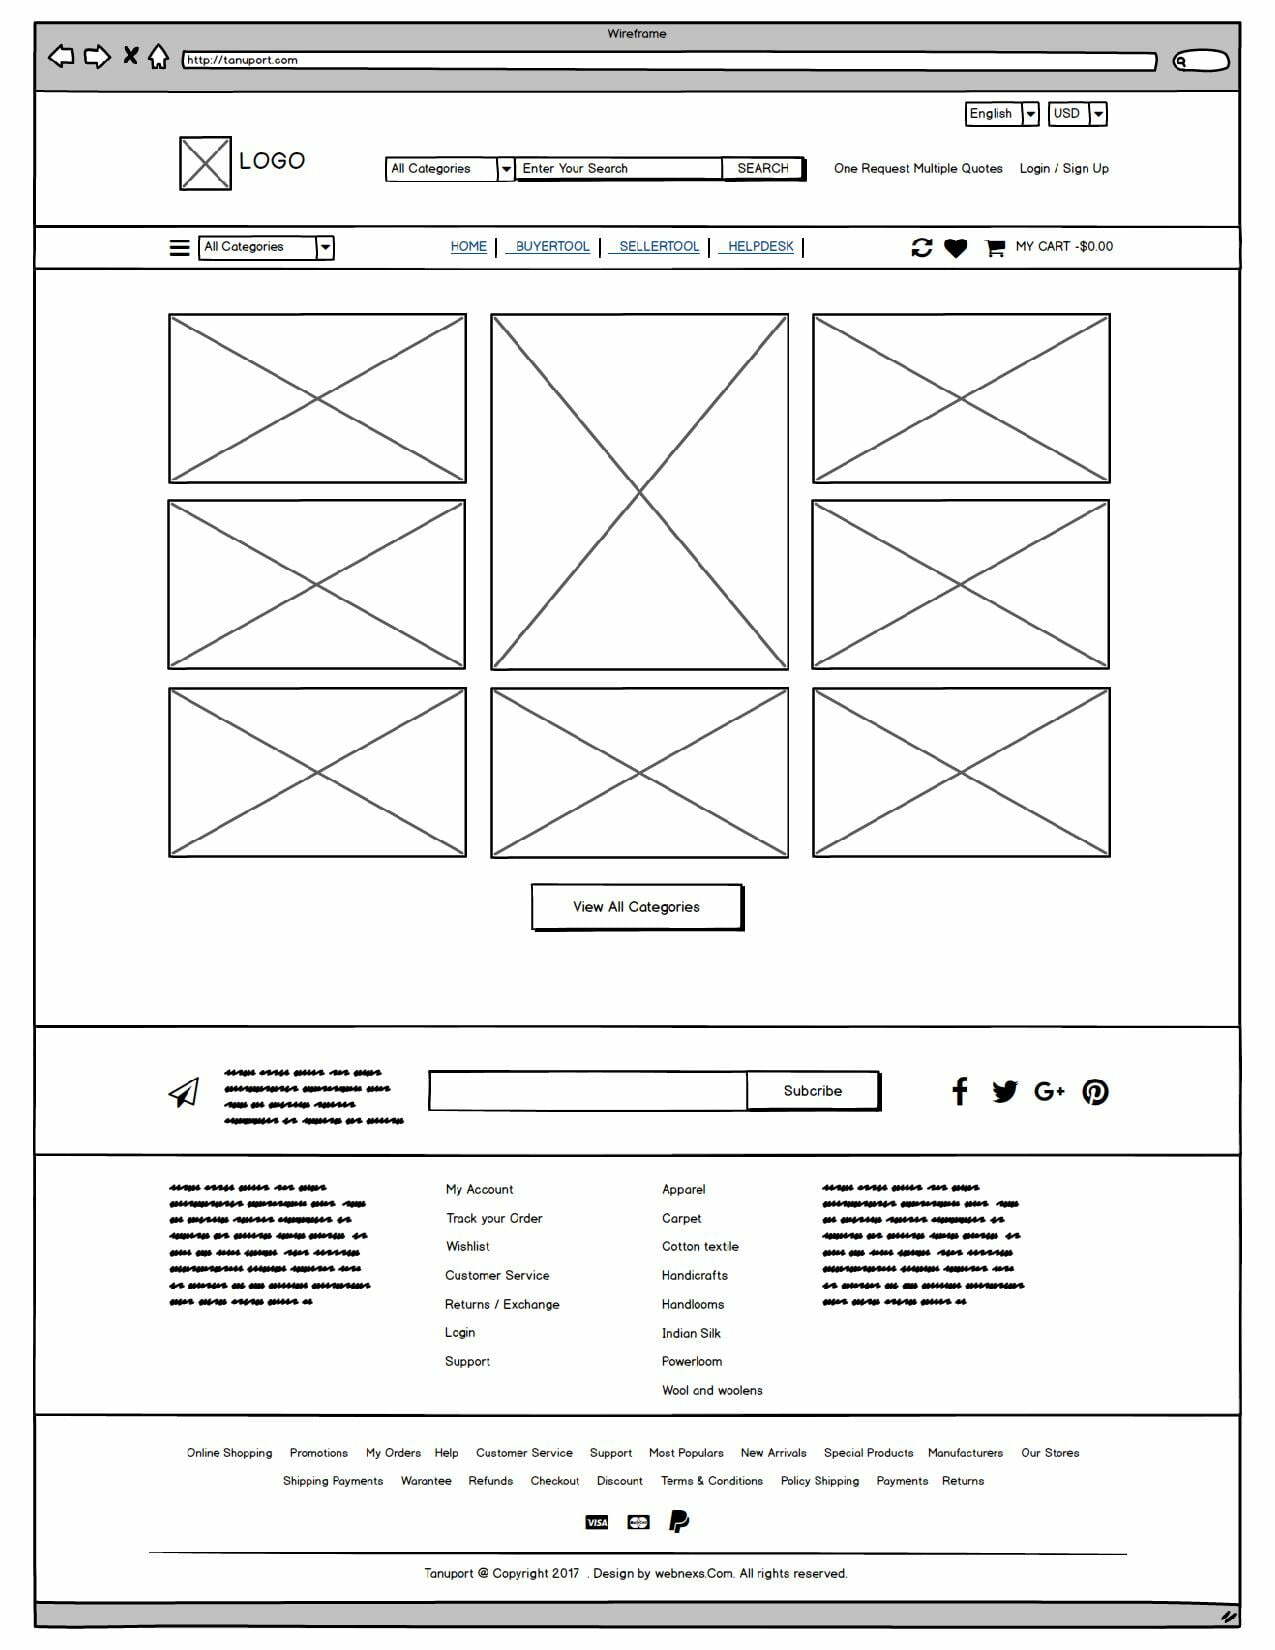 Tanuport Wireframe by Webnexs